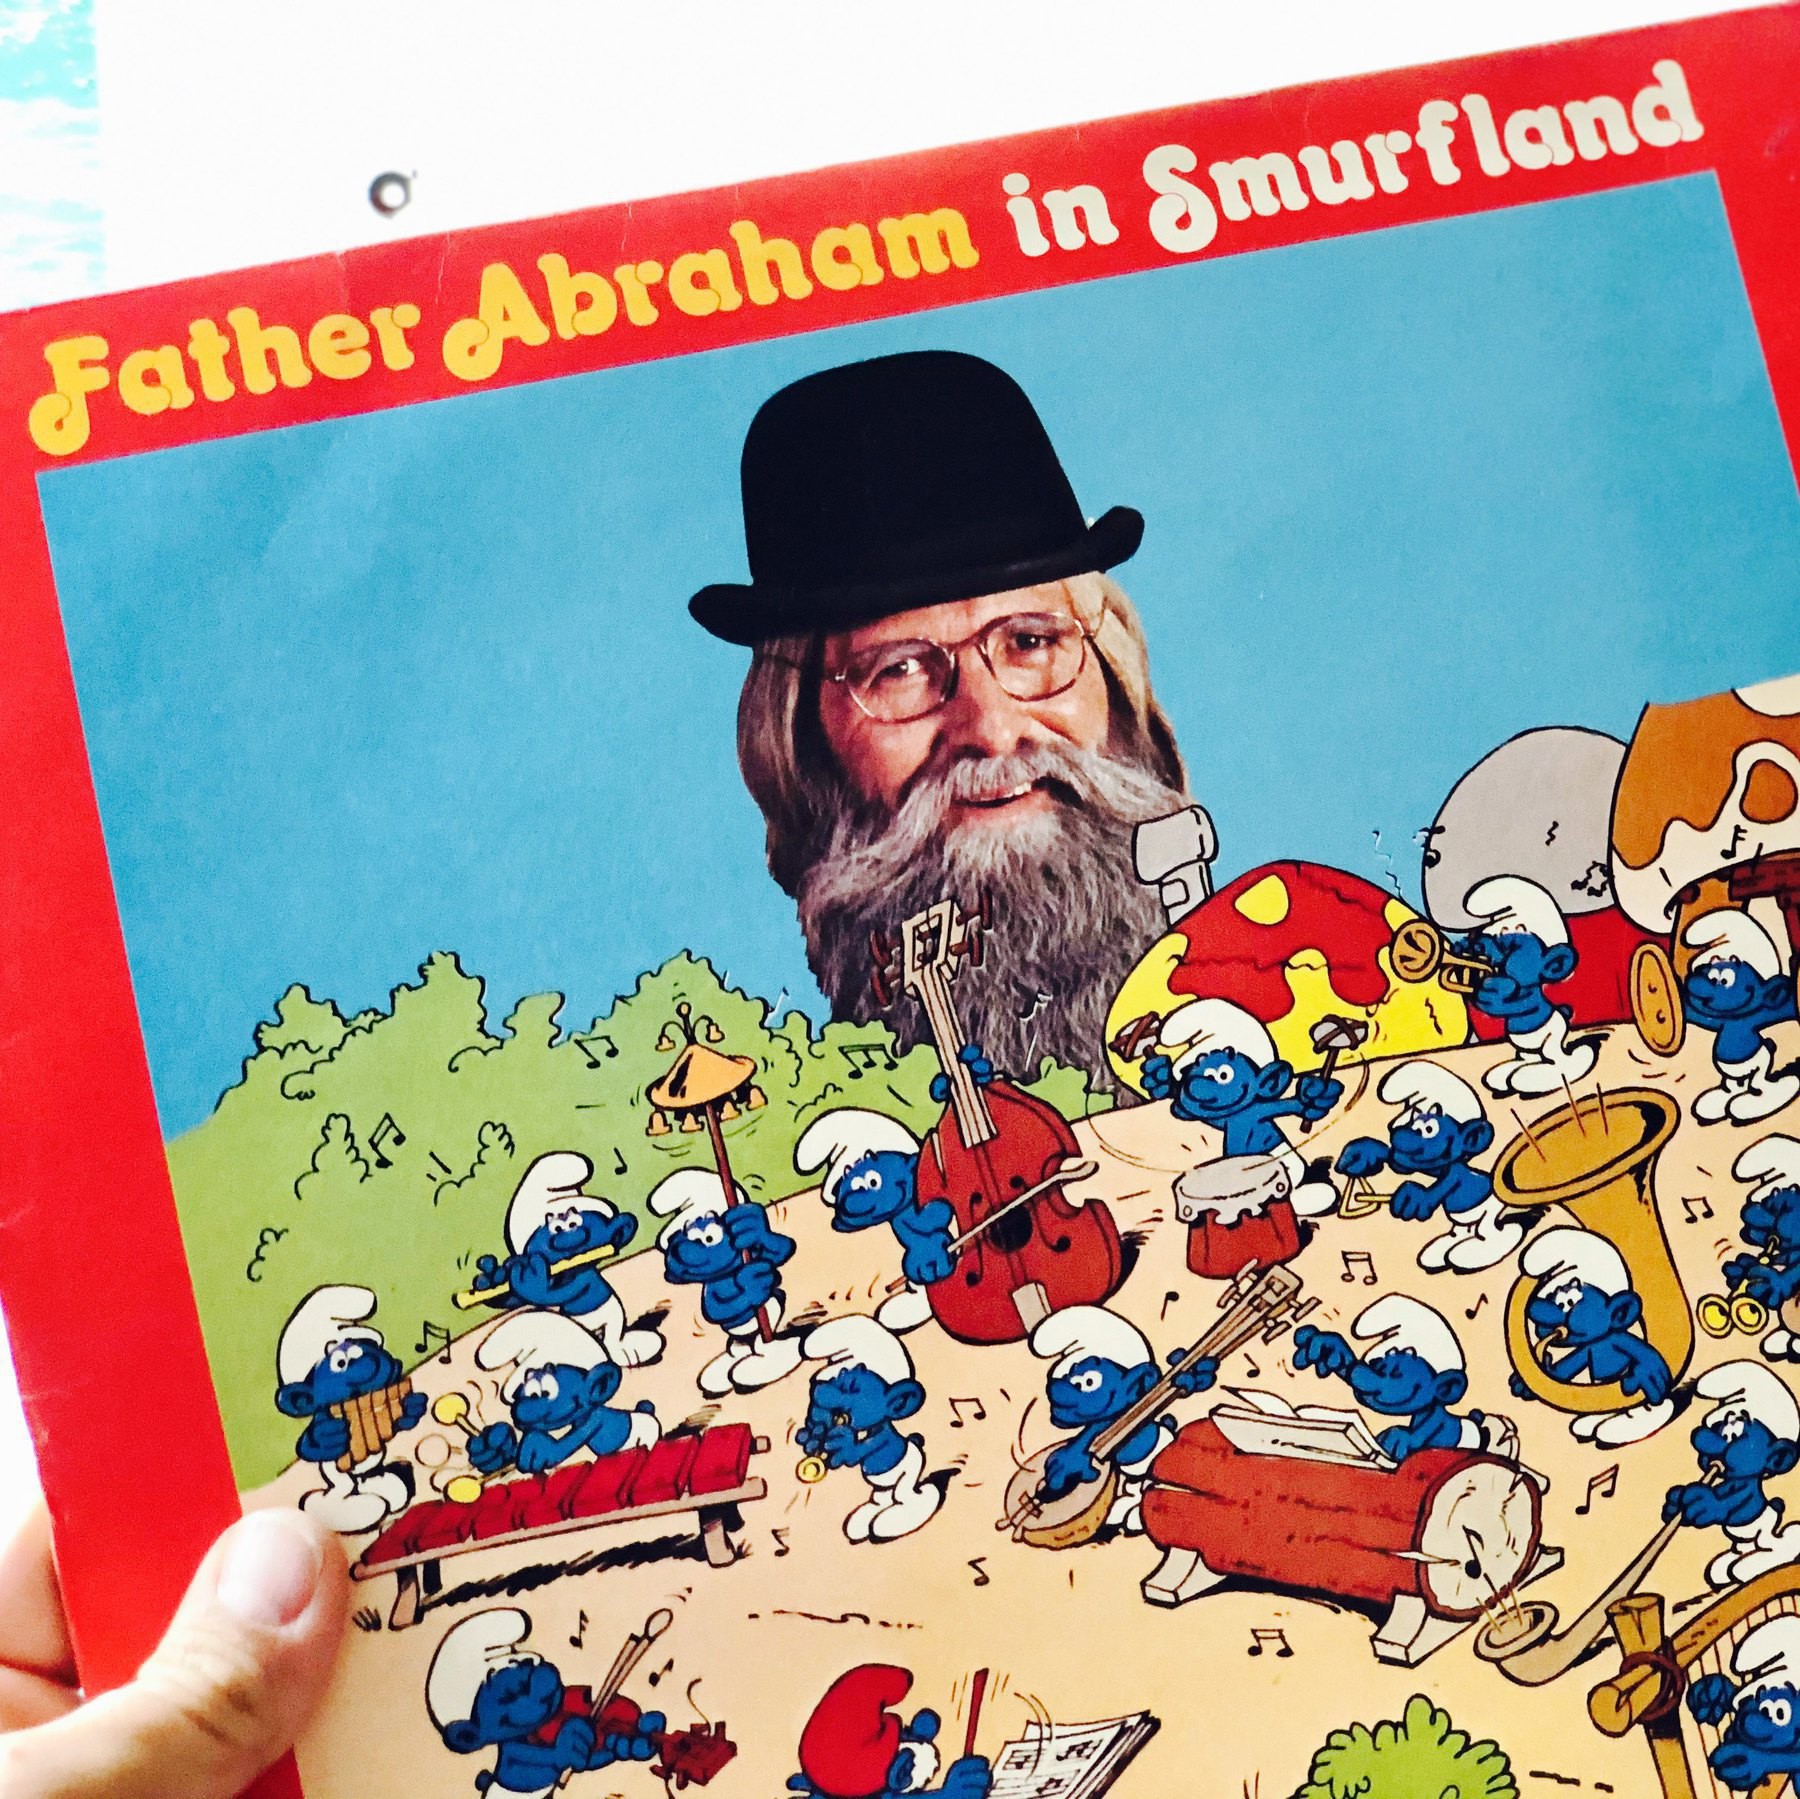 the sleeve of the 1978 album Father Abraham in Smurfland. 